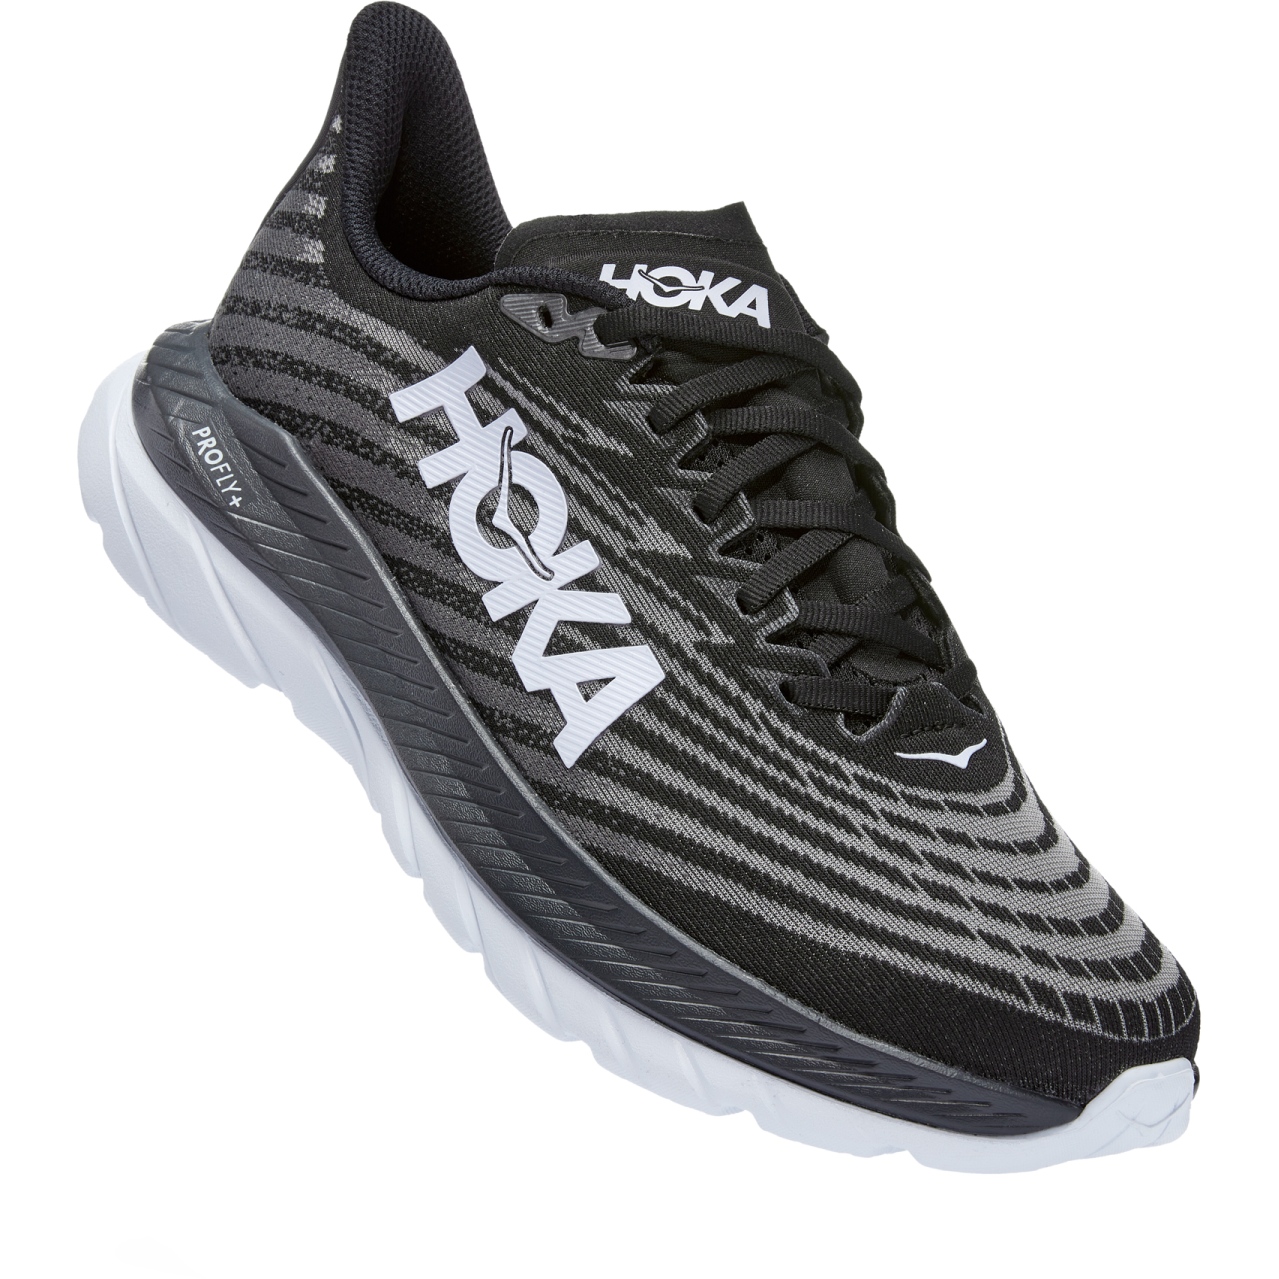 Picture of Hoka Mach 5 Running Shoes - black / castlerock